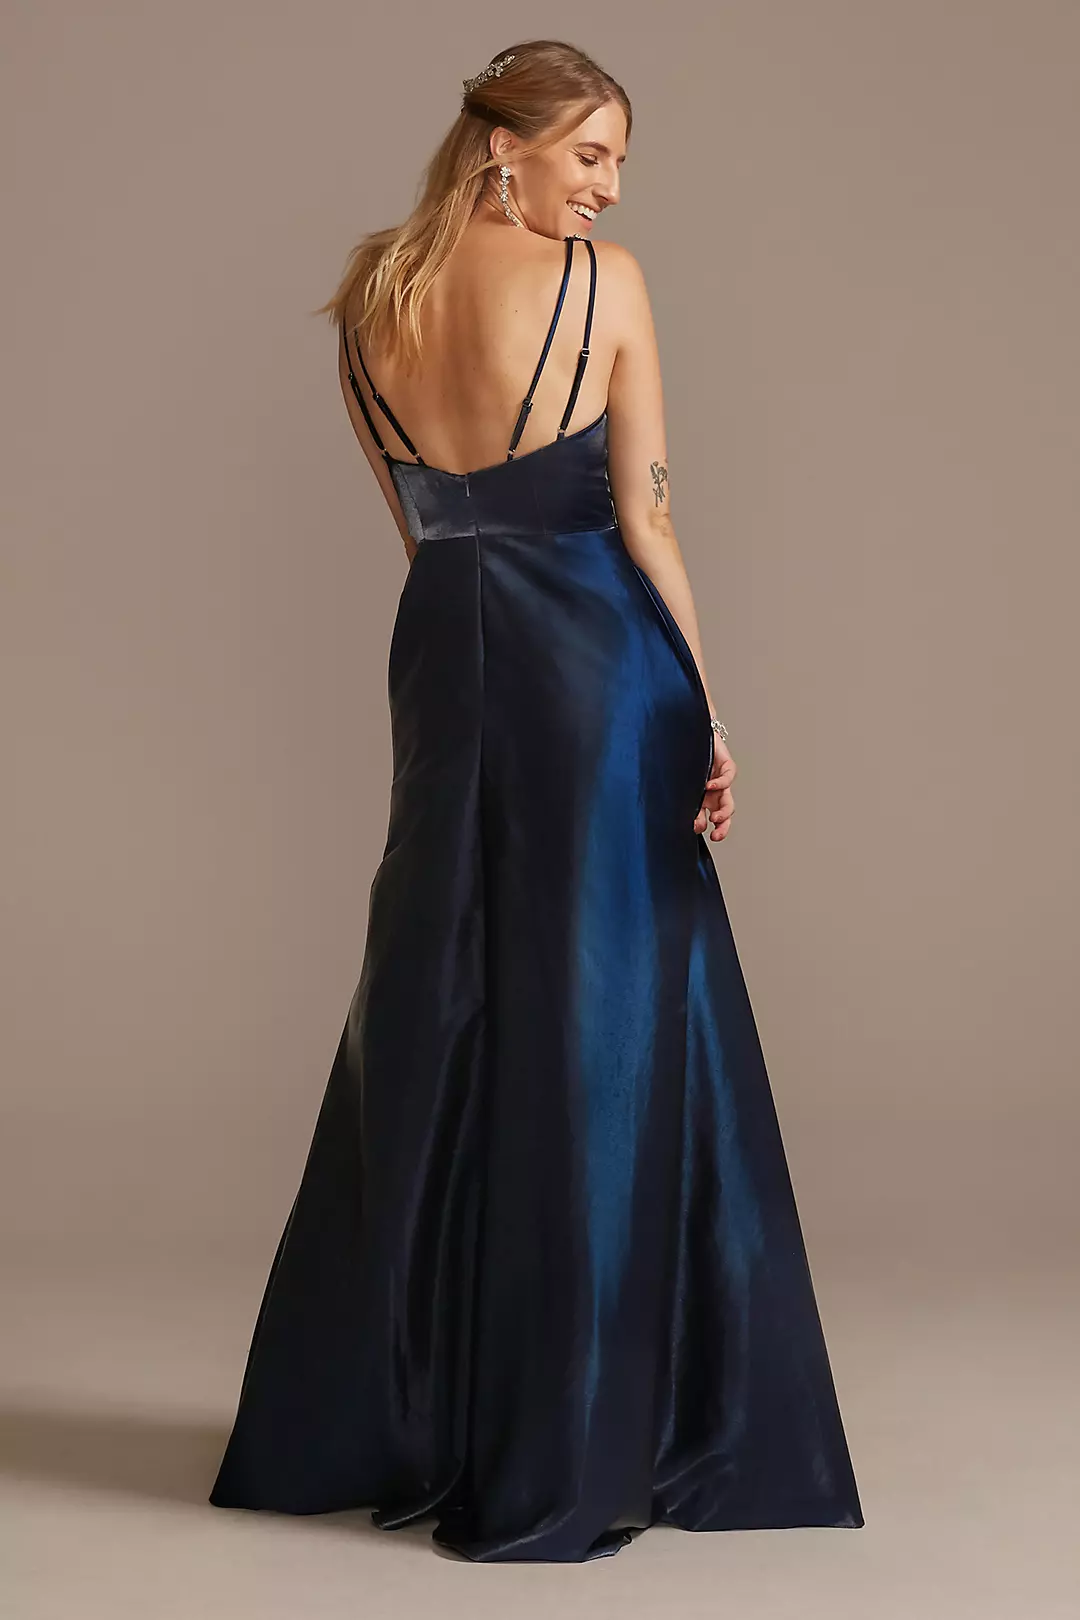 V-Neck Satin Ball Gown with Crystal Strap Details Image 2